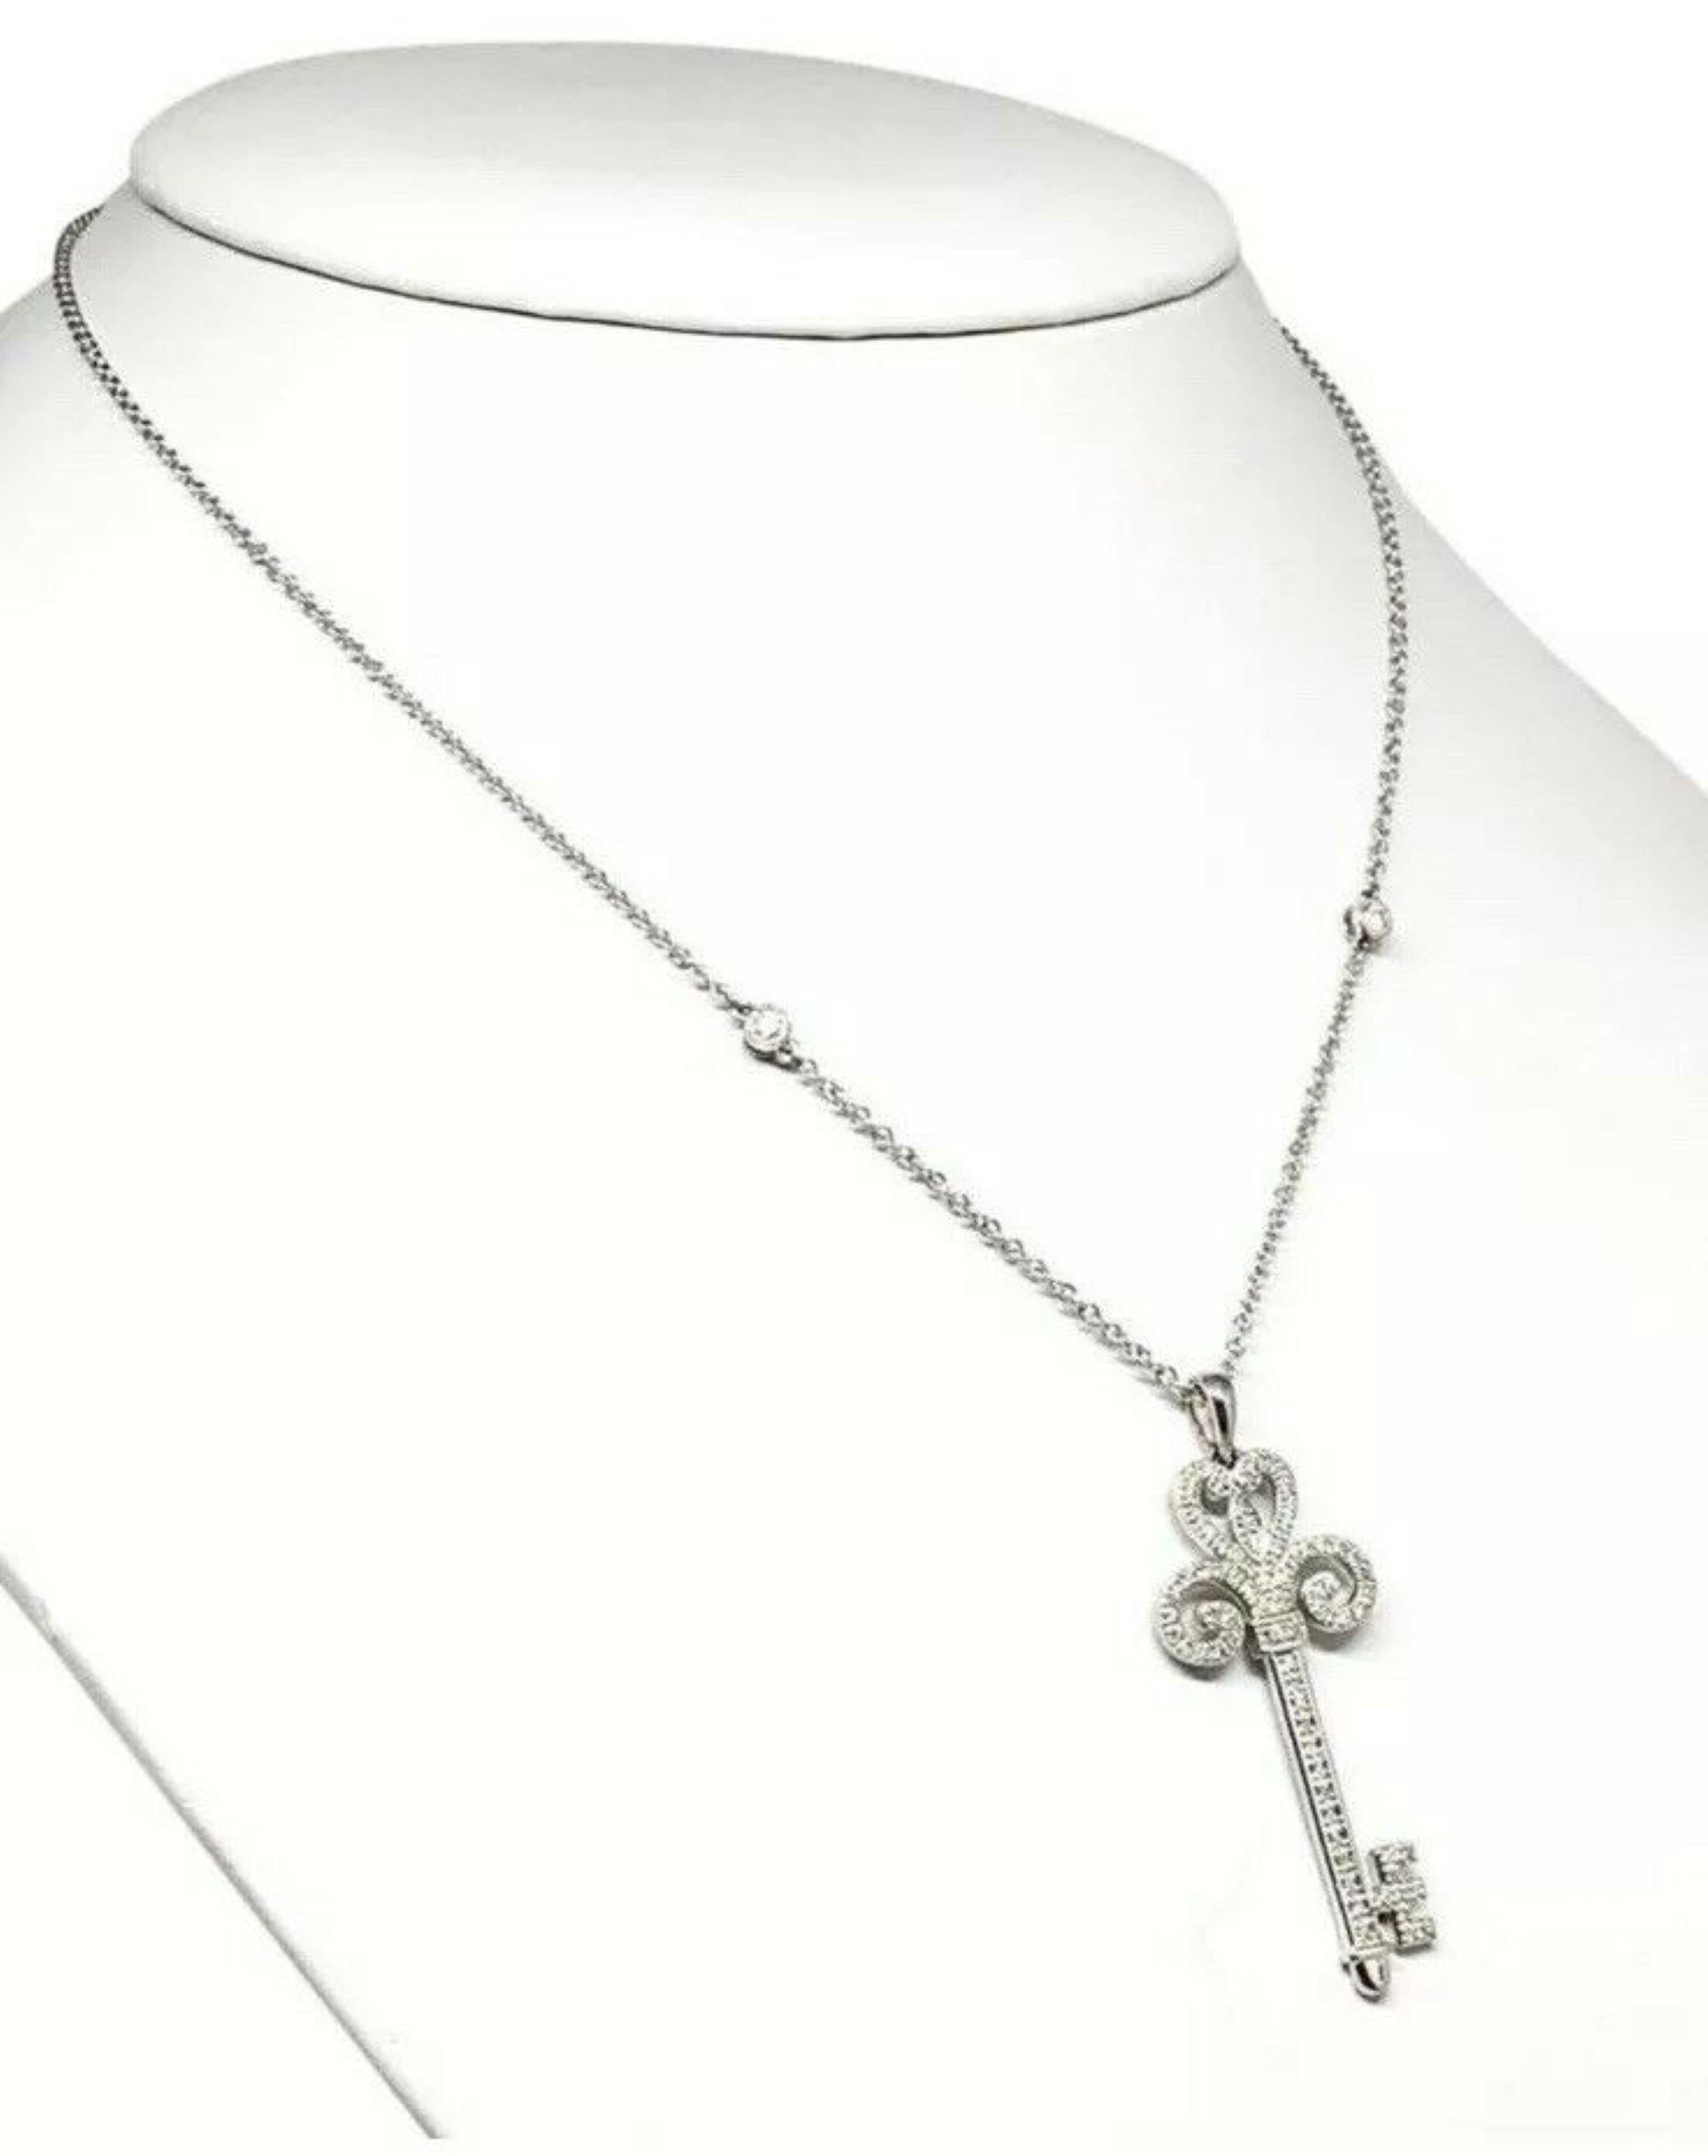 Fine Ladies Diamond Key 14k White Gold Italy Necklace 0.40 TCW Certified In New Condition For Sale In Brooklyn, NY